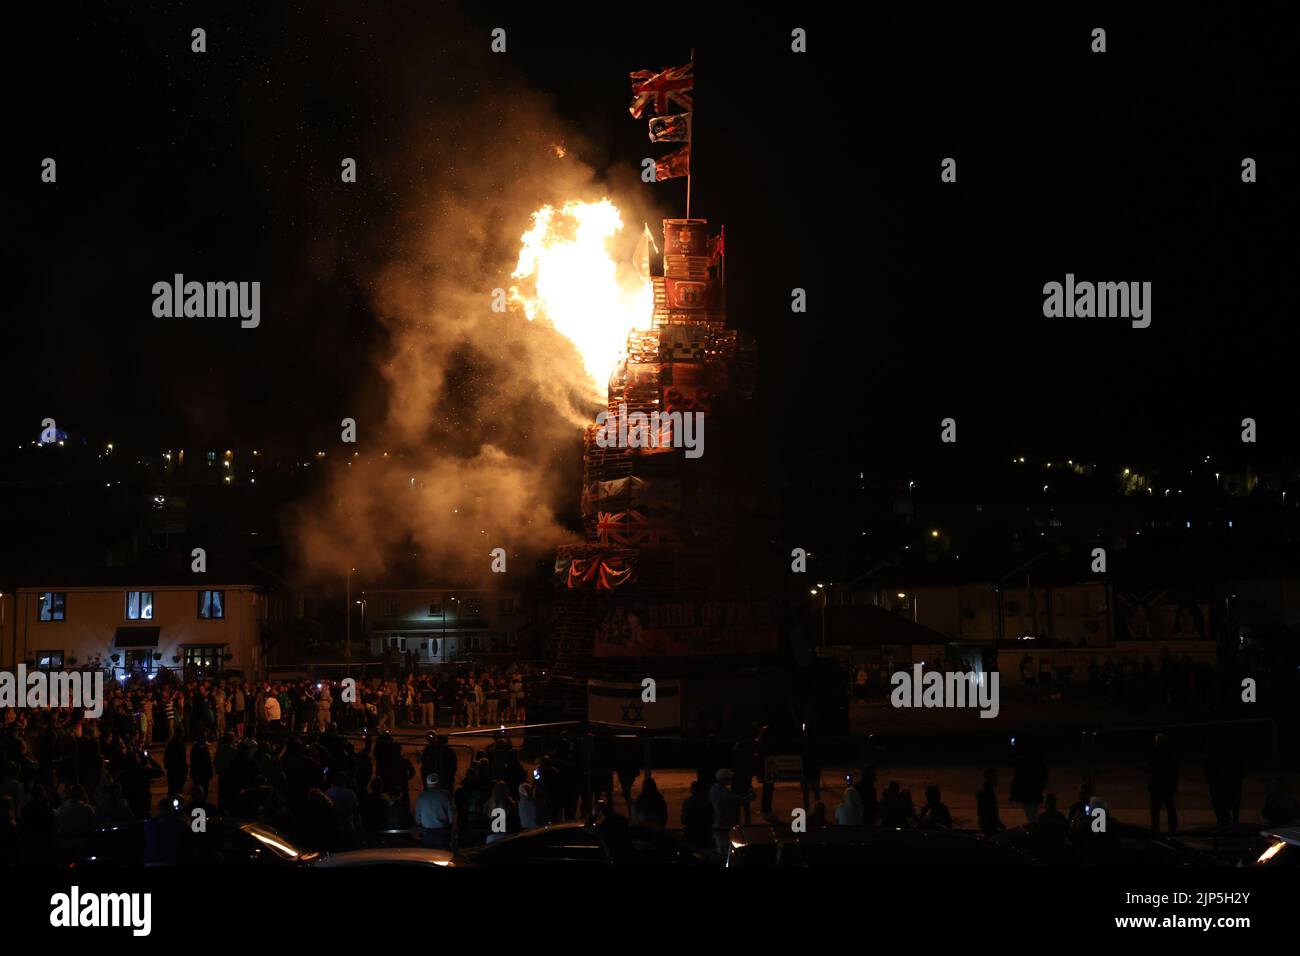 People gather at the burning of a bonfire to mark the Catholic Feast of the Assumption in the Bogside area of Londonderry, Northern Ireland. Picture date: Monday August 15, 2022. Stock Photo